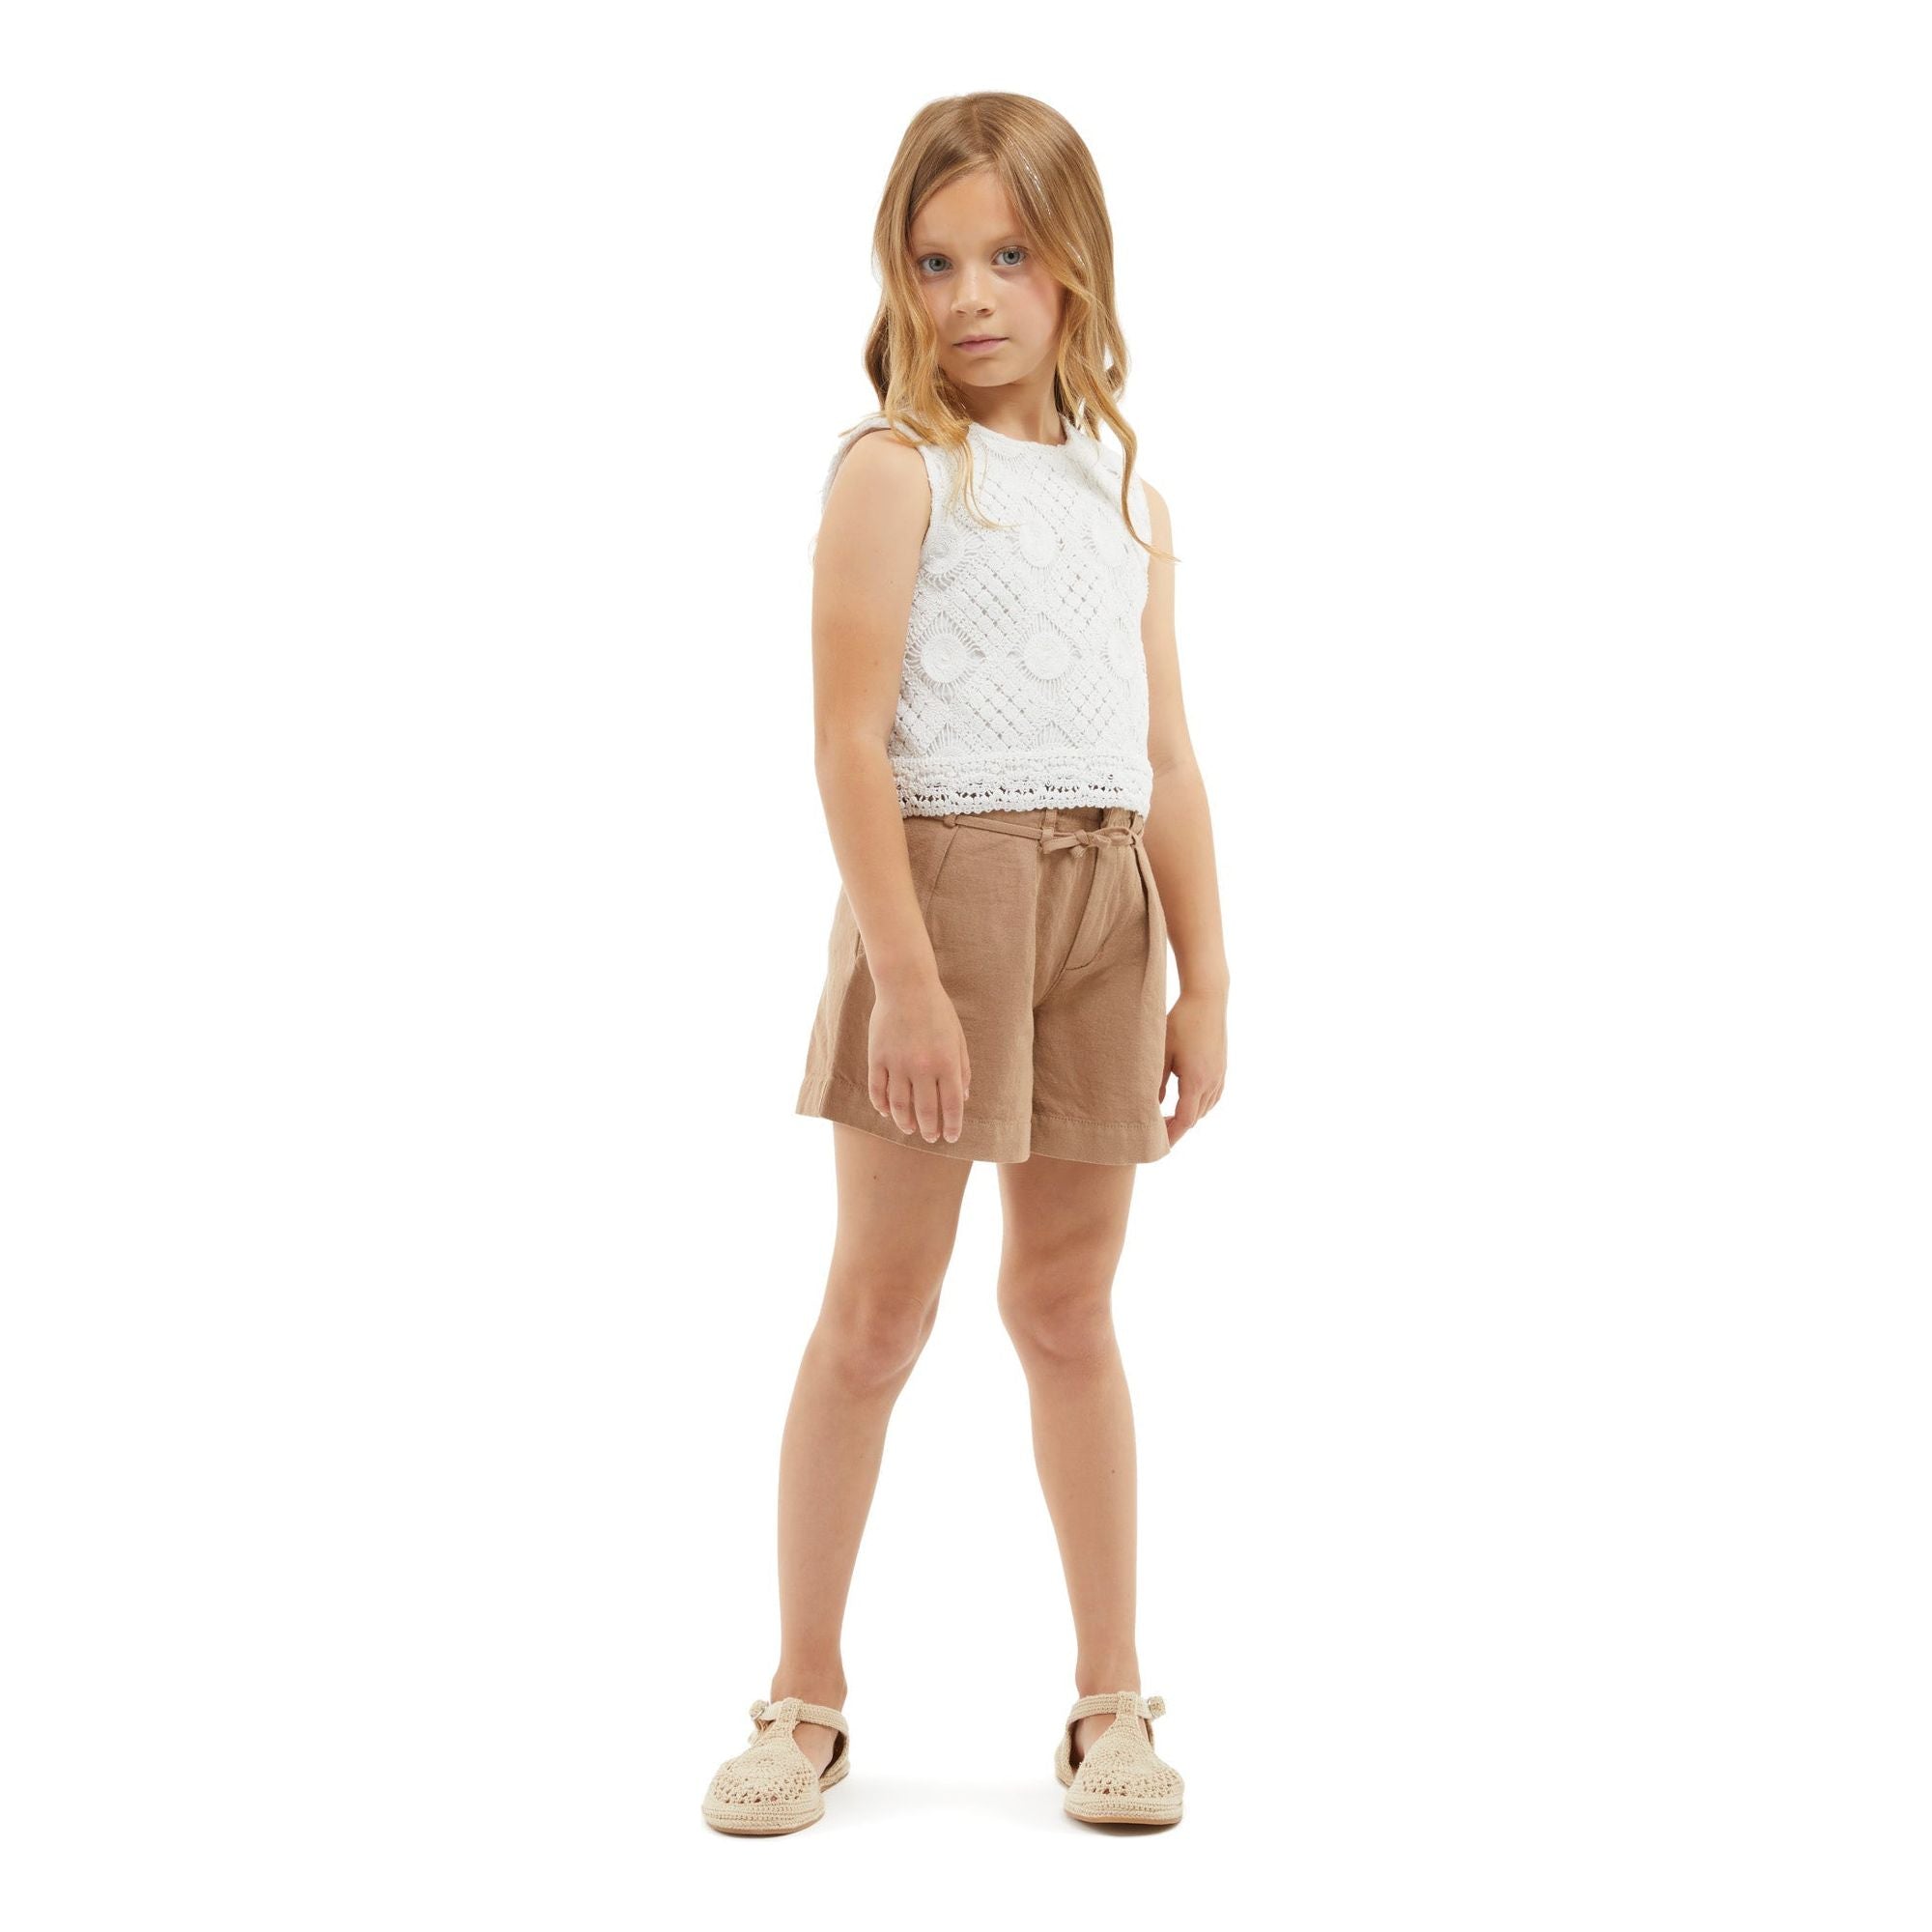 Guess - Girls Lace Tank in Cream White